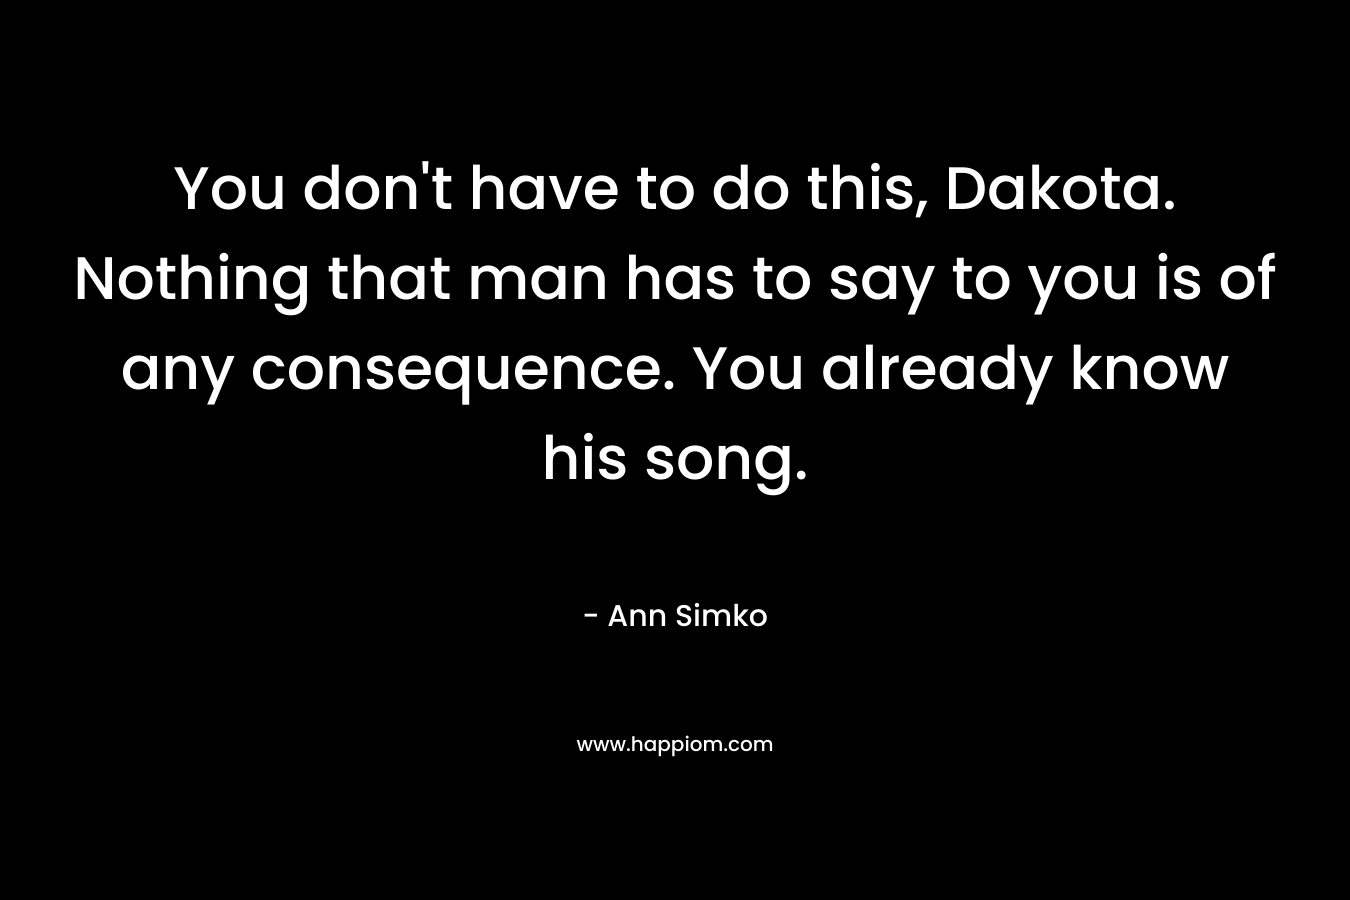 You don’t have to do this, Dakota. Nothing that man has to say to you is of any consequence. You already know his song. – Ann Simko